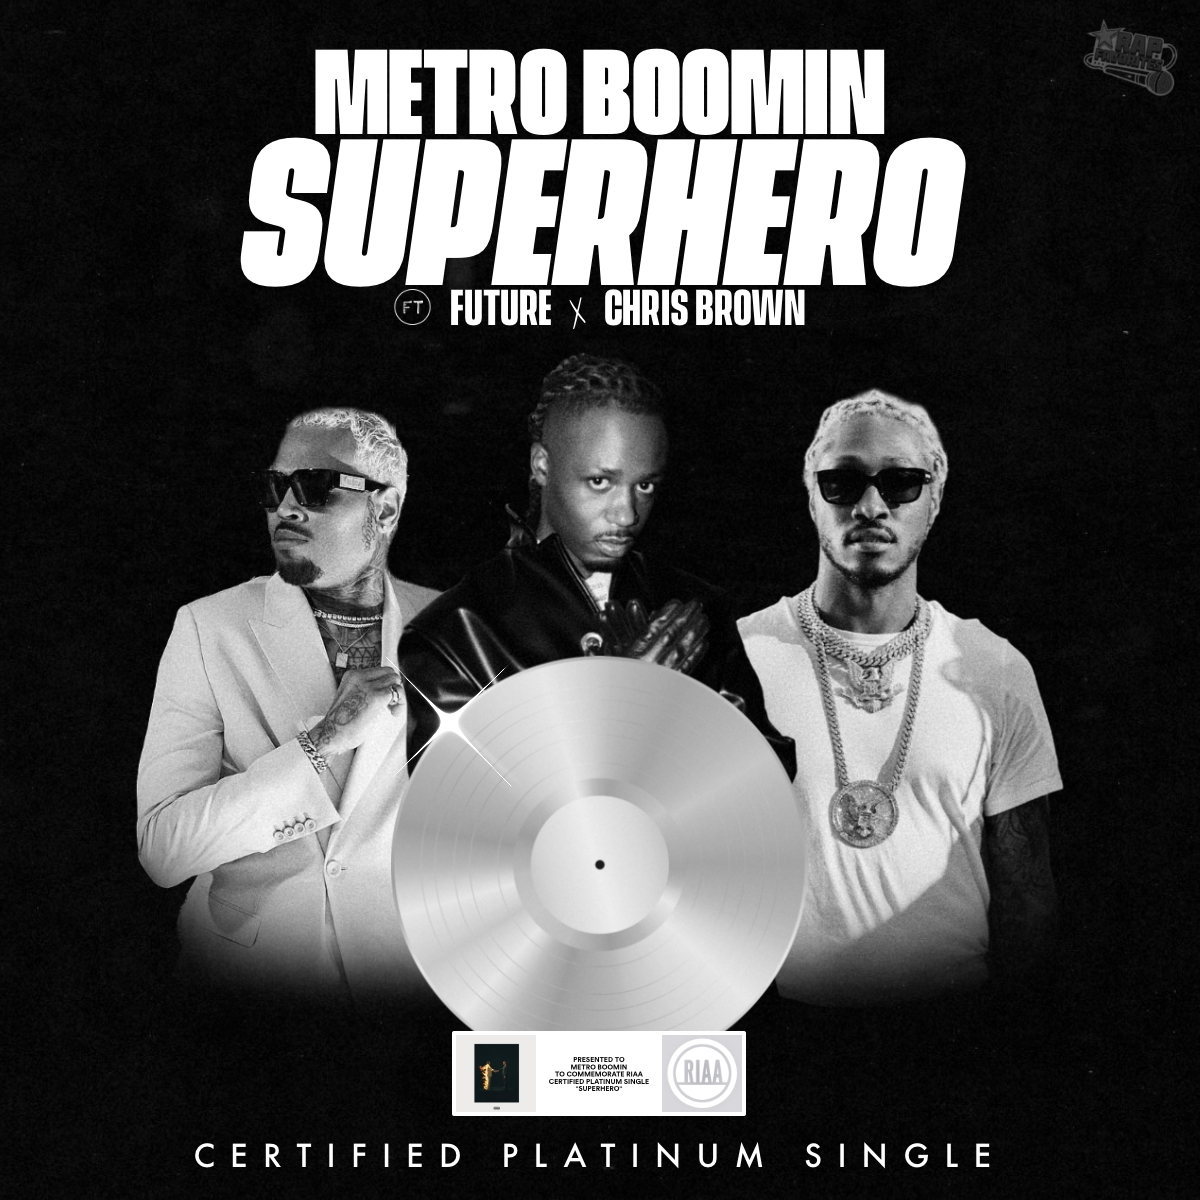 Rap Favorites on X: Metro Boomin's hit single Superhero featuring Future  and Chris Brown is now certified platinum 💿  / X